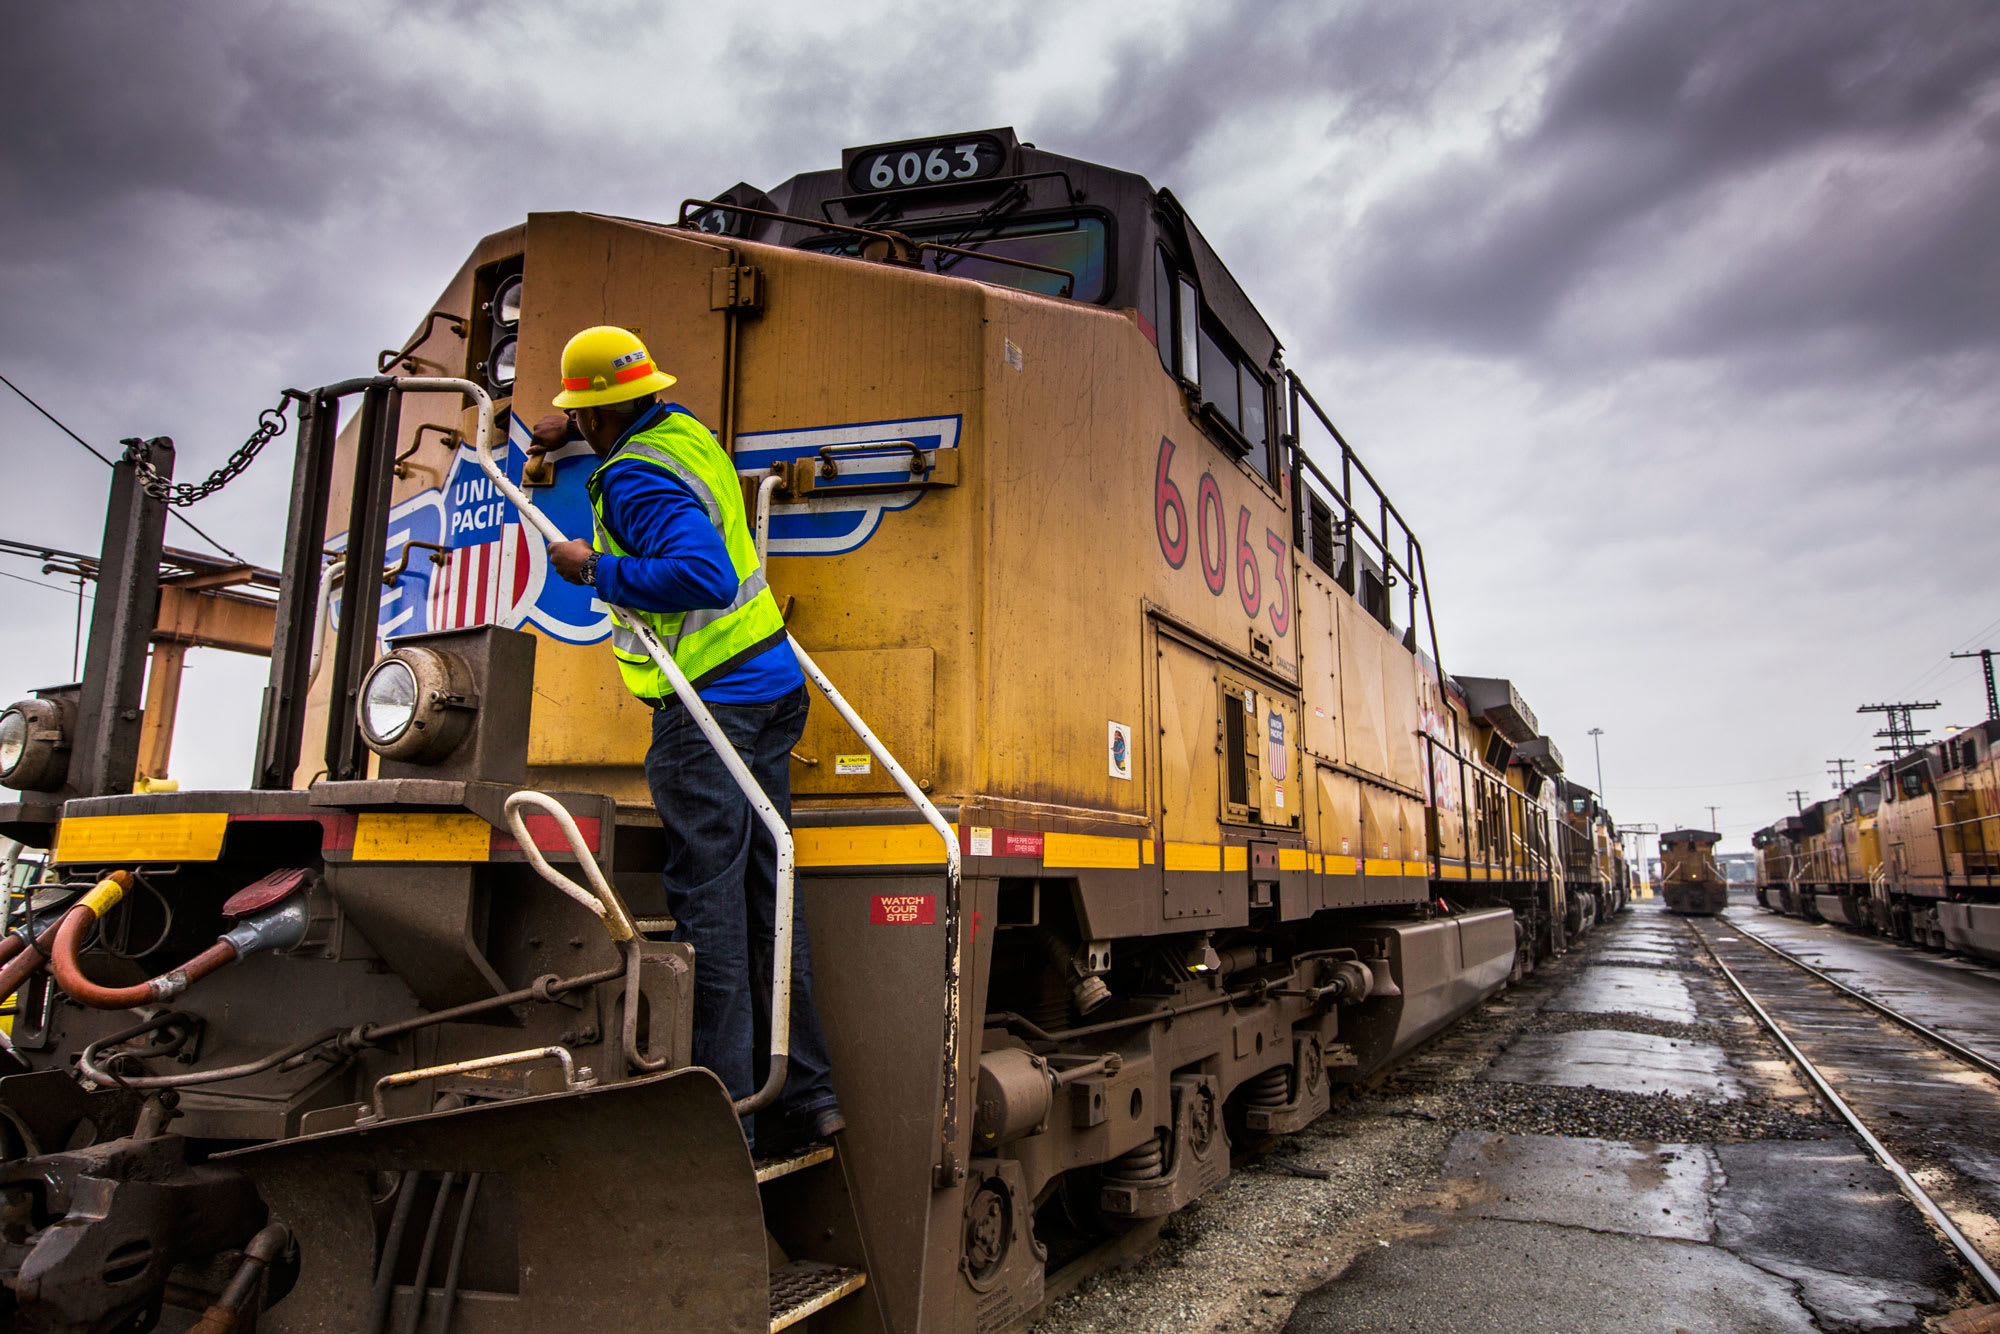 Union Pacific CEO Lance Fritz sees ‘indicators of optimism’ in a number of markets